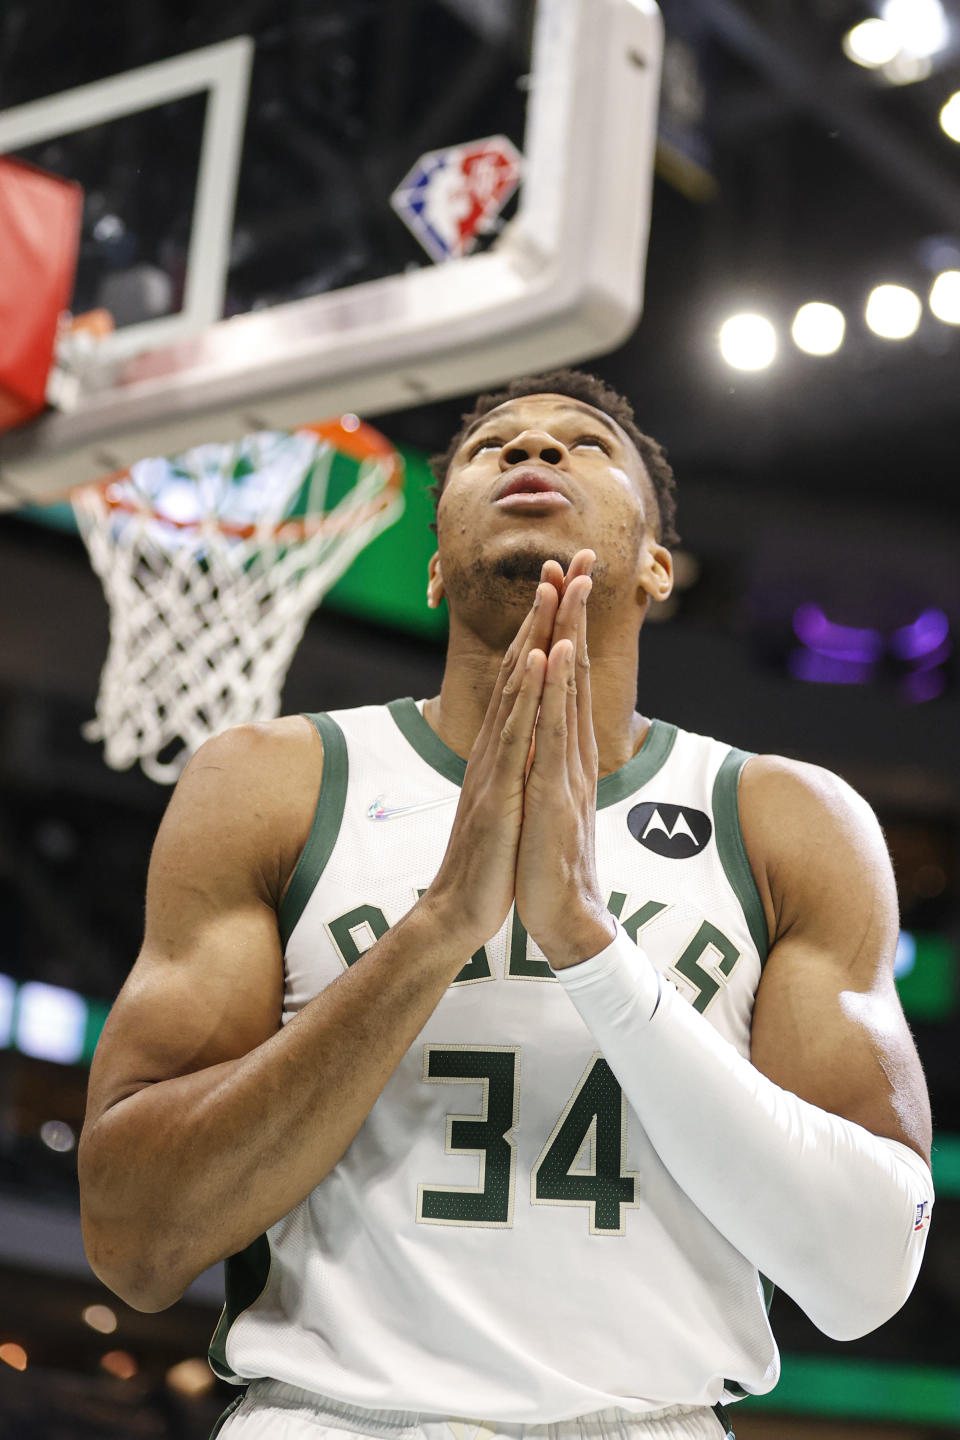 Milwaukee Bucks forward Giannis Antetokounmpo (34) reacts at the start of the game against the Minnesota Timberwolves during the first half of an NBA basketball game Wednesday, Oct. 27, 2021, in Milwaukee. (AP Photo/Jeffrey Phelps)